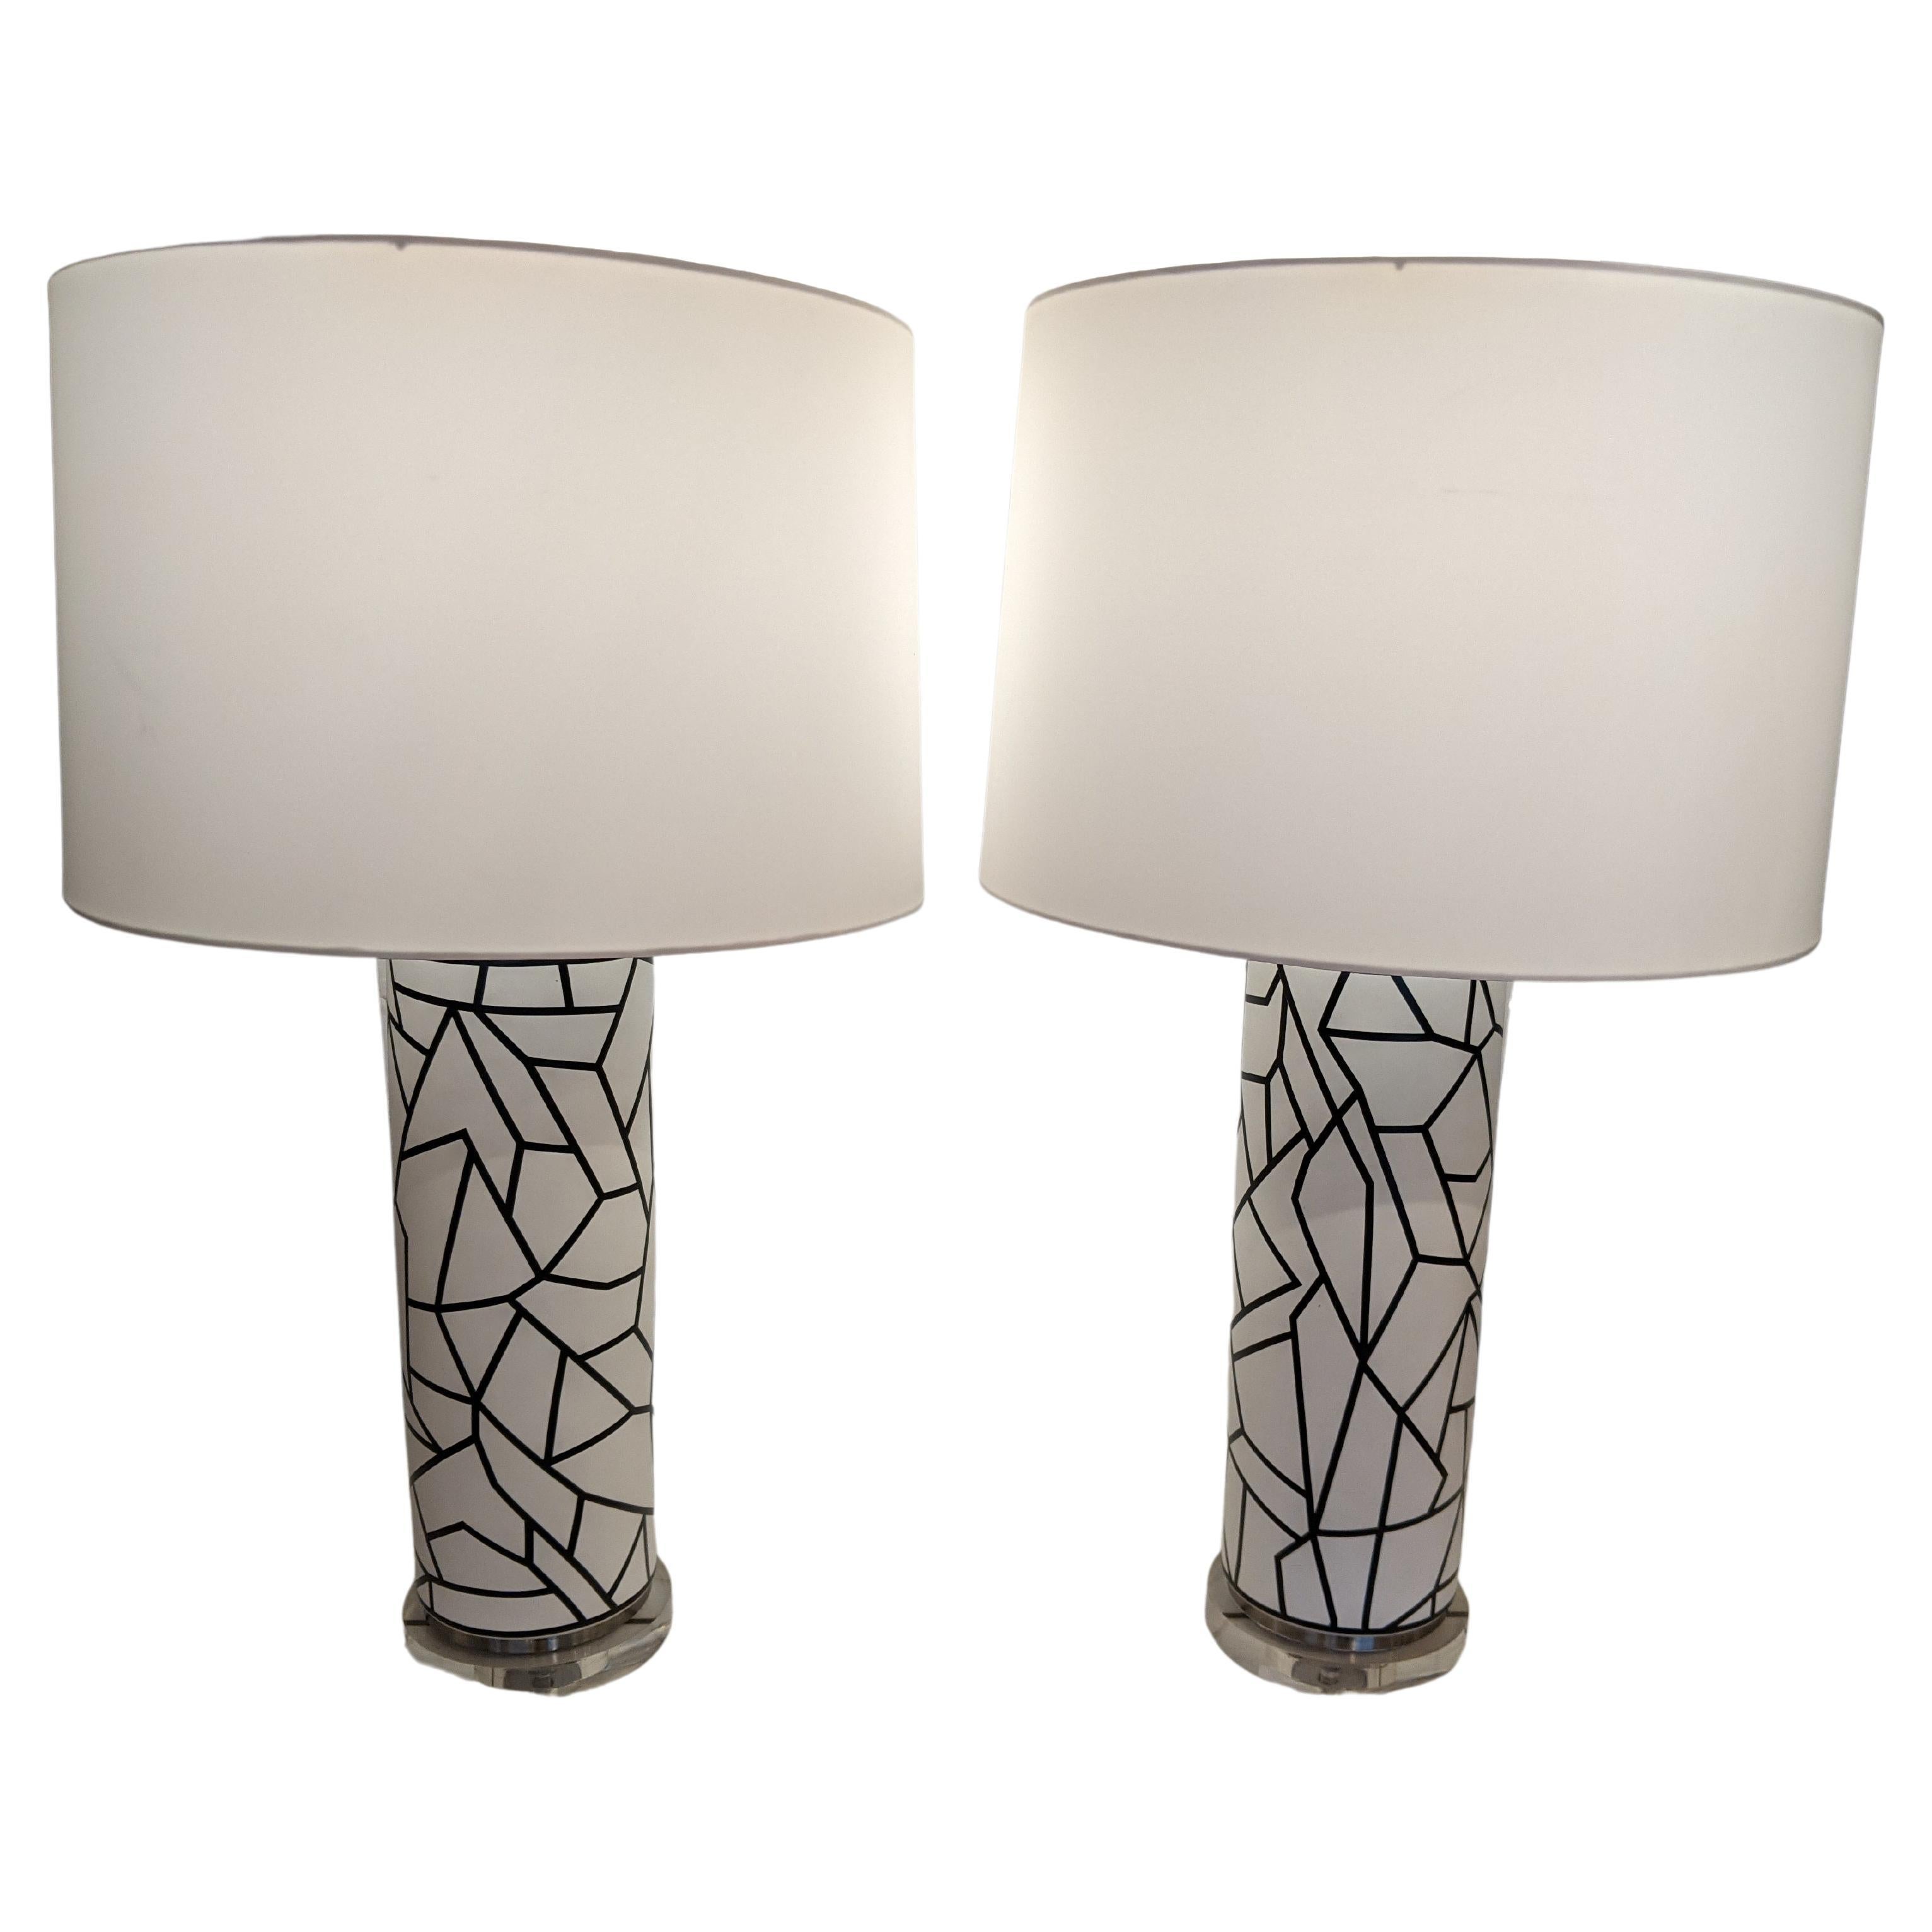 Cool Pair of Large Graphic Black and White Abstract Columnar Table Lamps